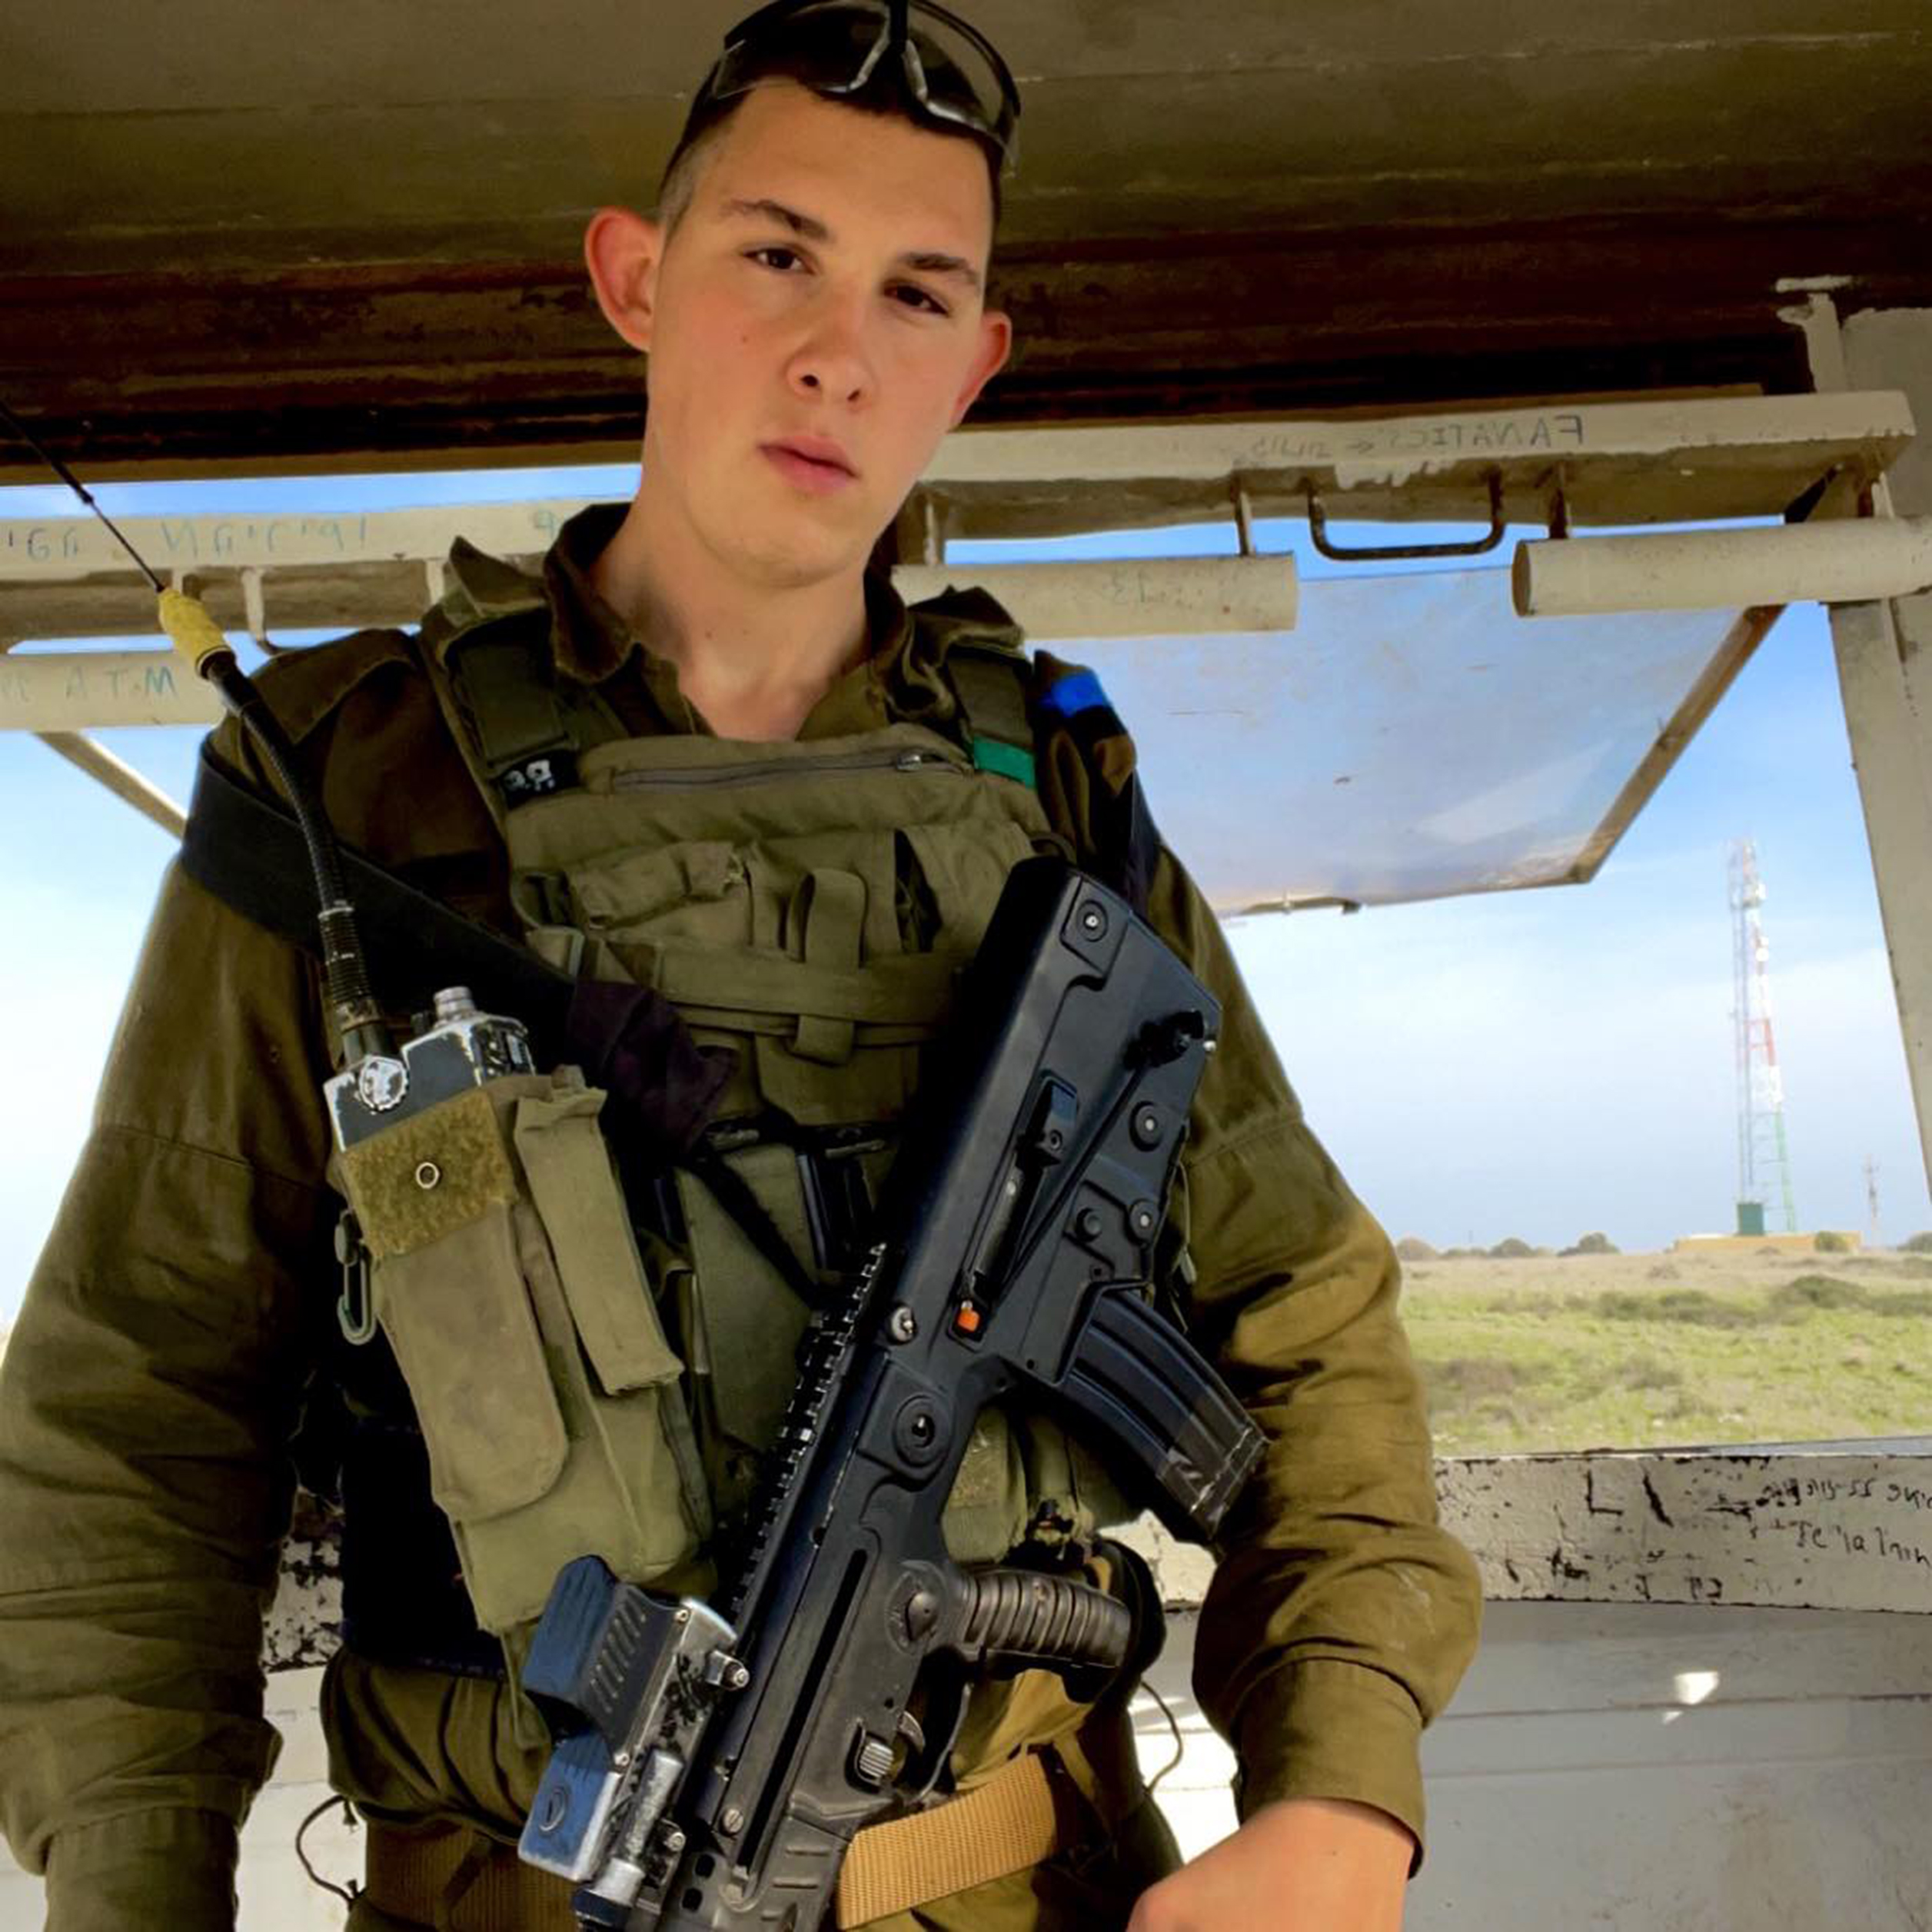 British national Nathaniel Young has been killed while fighting for Israel